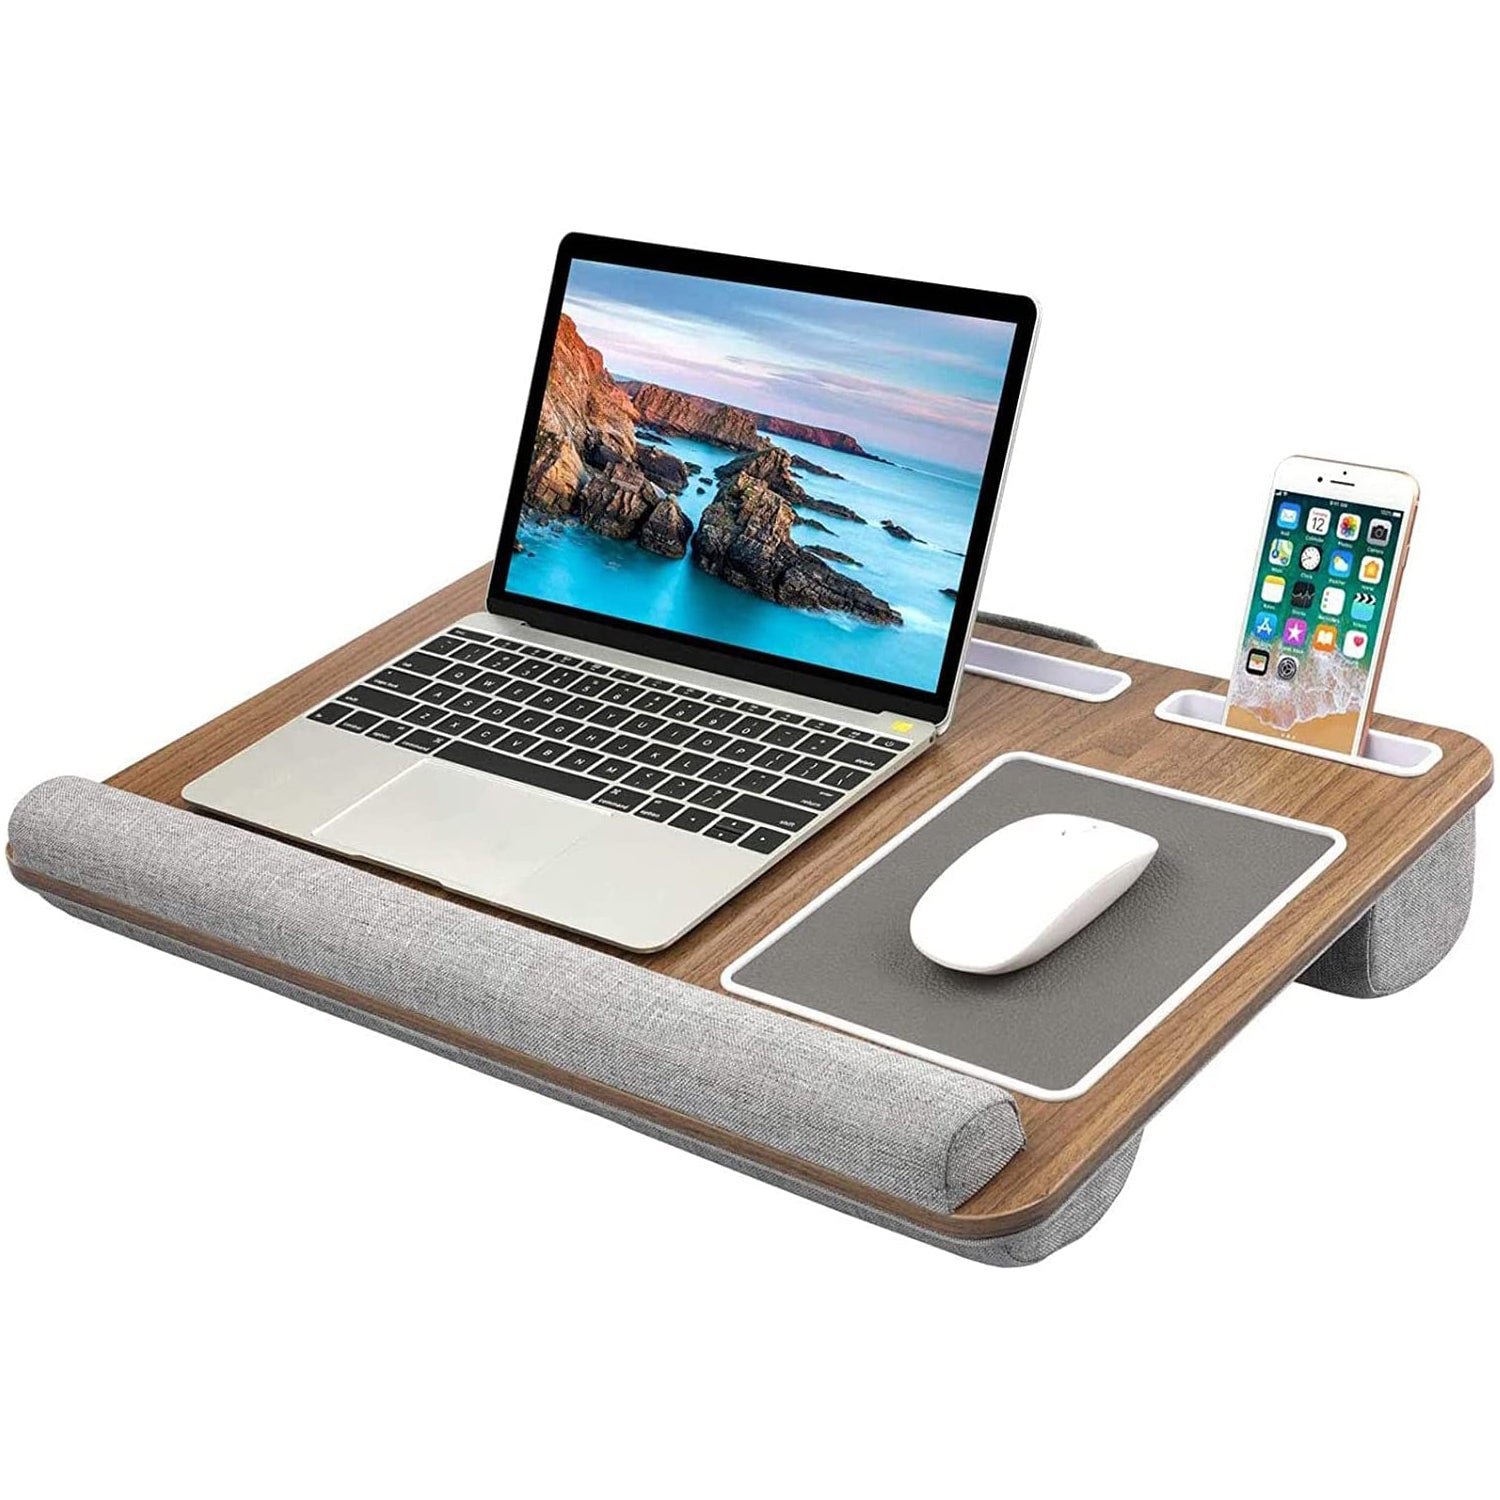 http://www.huanuo.com/cdn/shop/products/HUANUO-Lap-Desk---Fits-up-to-17-inches-Laptop-Desk_-Built-in-Mouse-Pad-_-Wrist-Pad-for-Notebook_-MacBook_-Tablet_-Laptop-Stand-with-Tablet_-Pen-_-Phone-Holder---HNLD6-0.jpg?v=1668512567